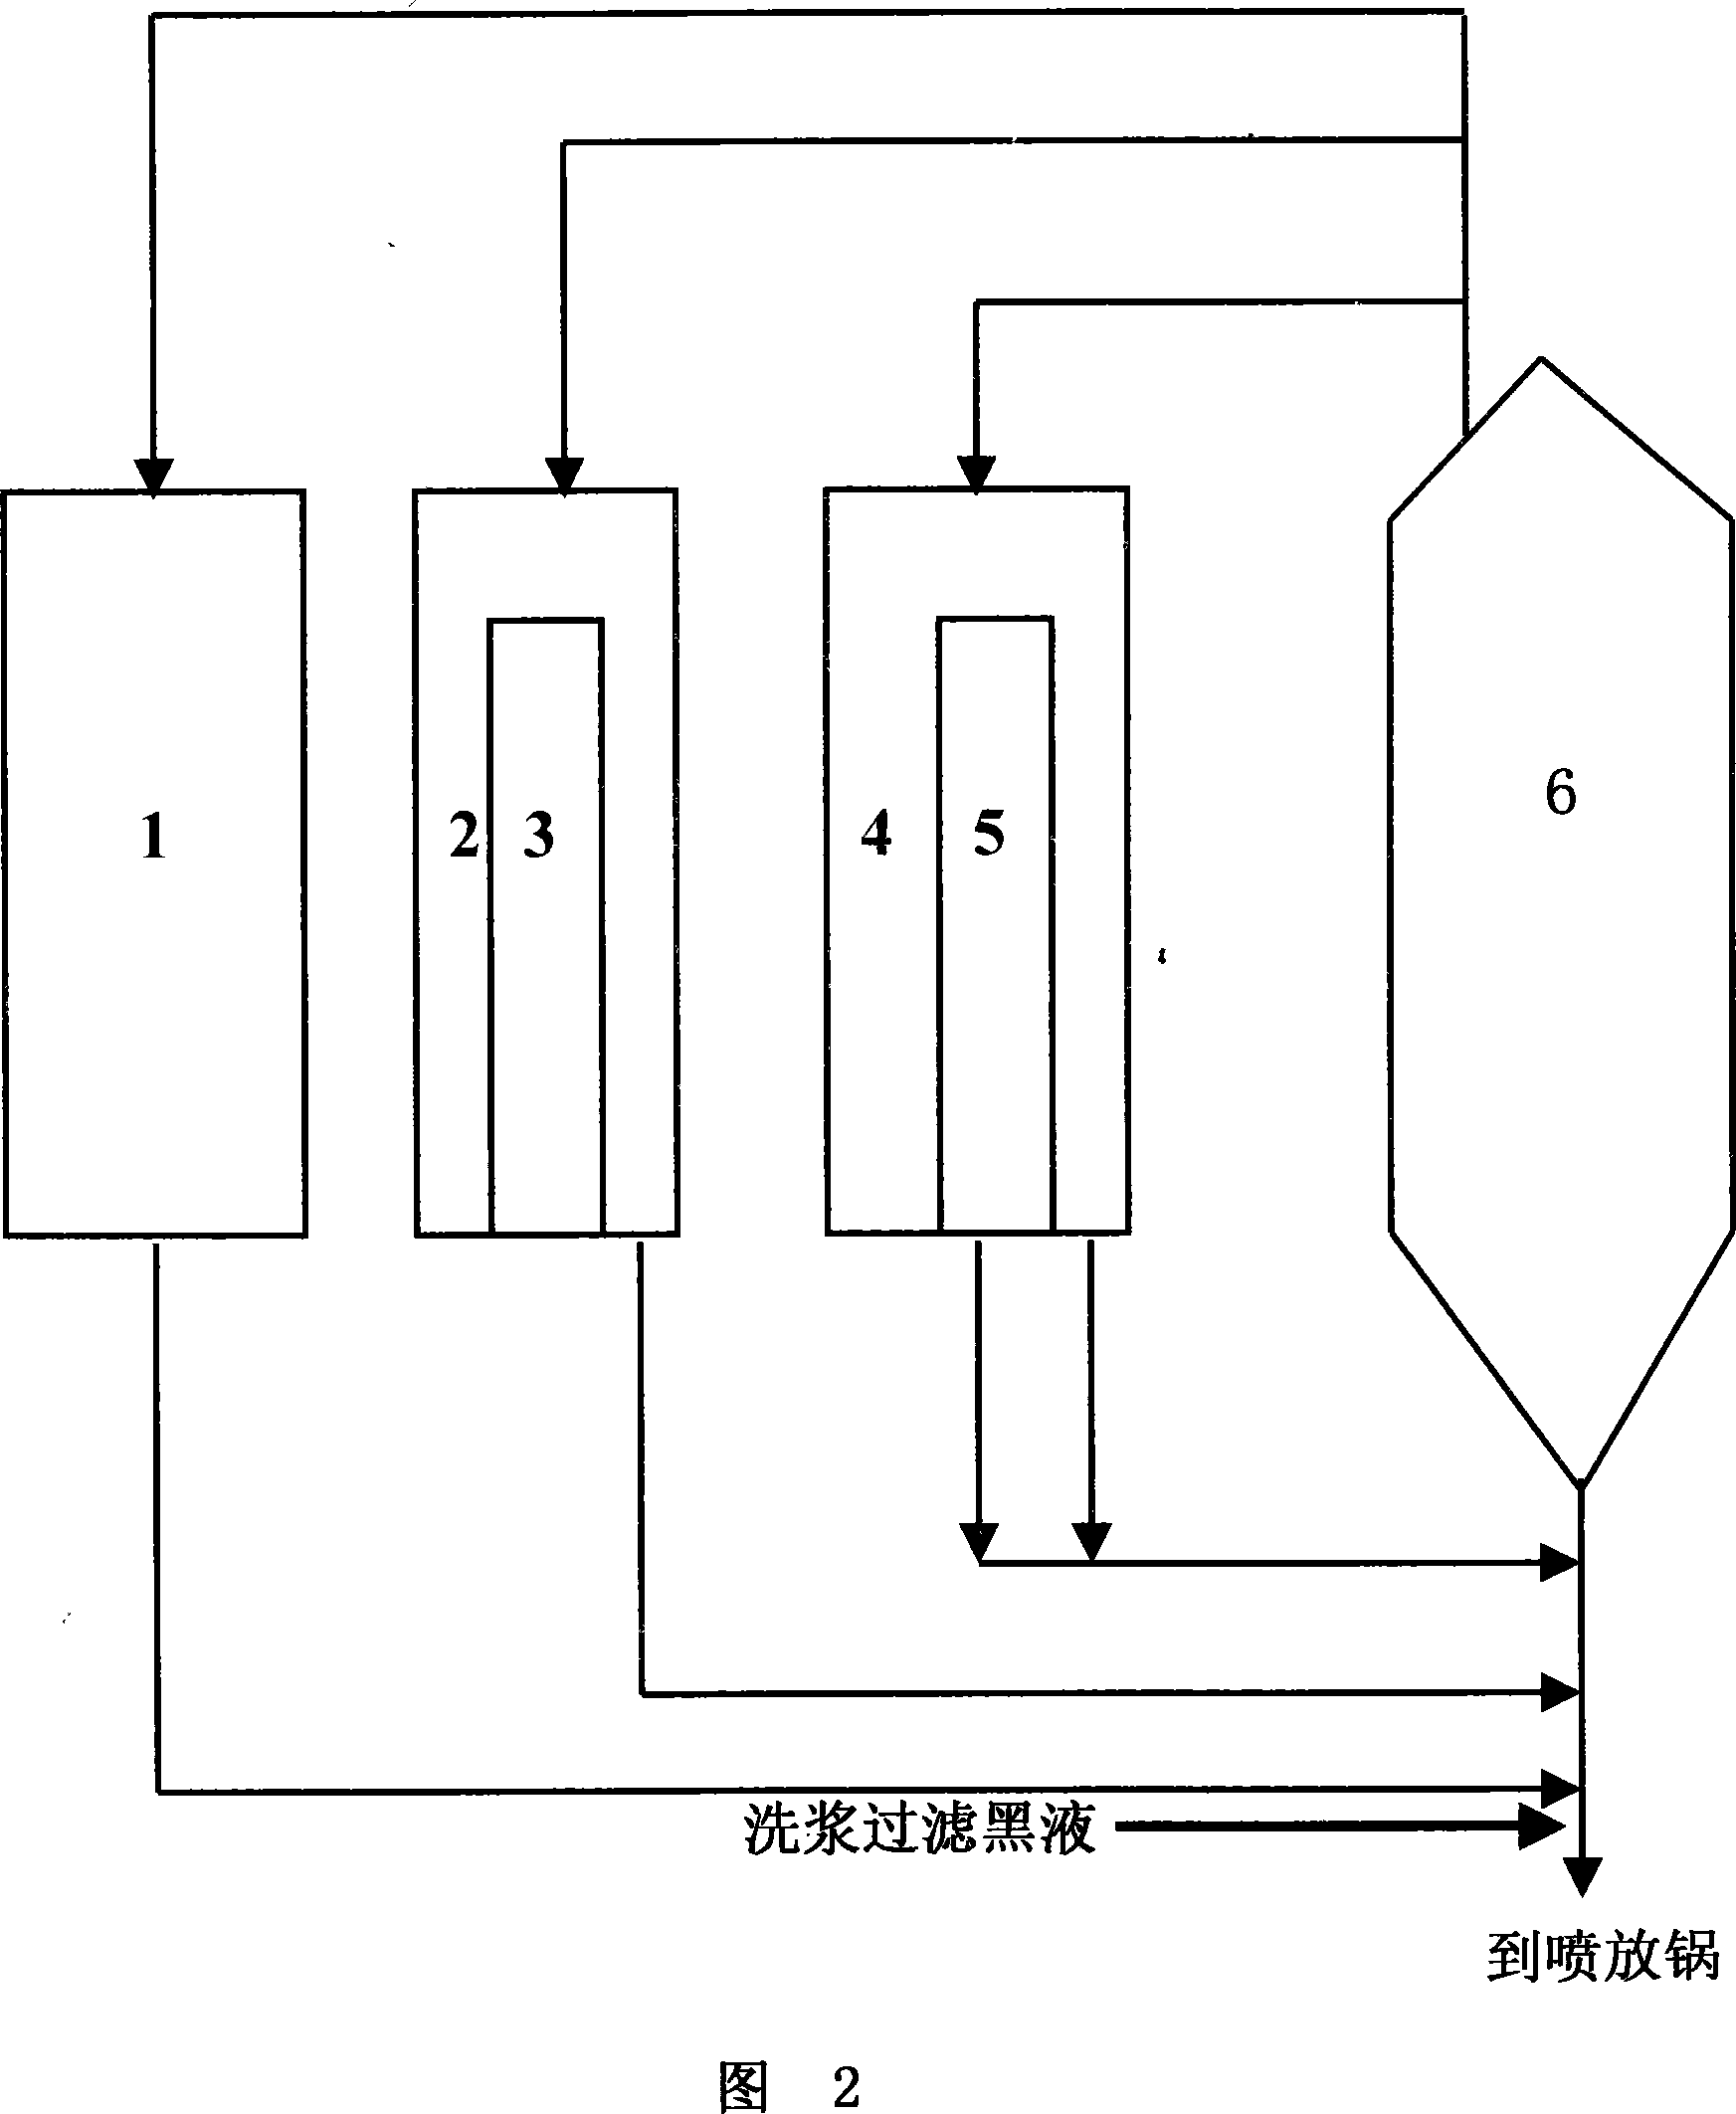 Method for producing Chinese red pine chemical pulp